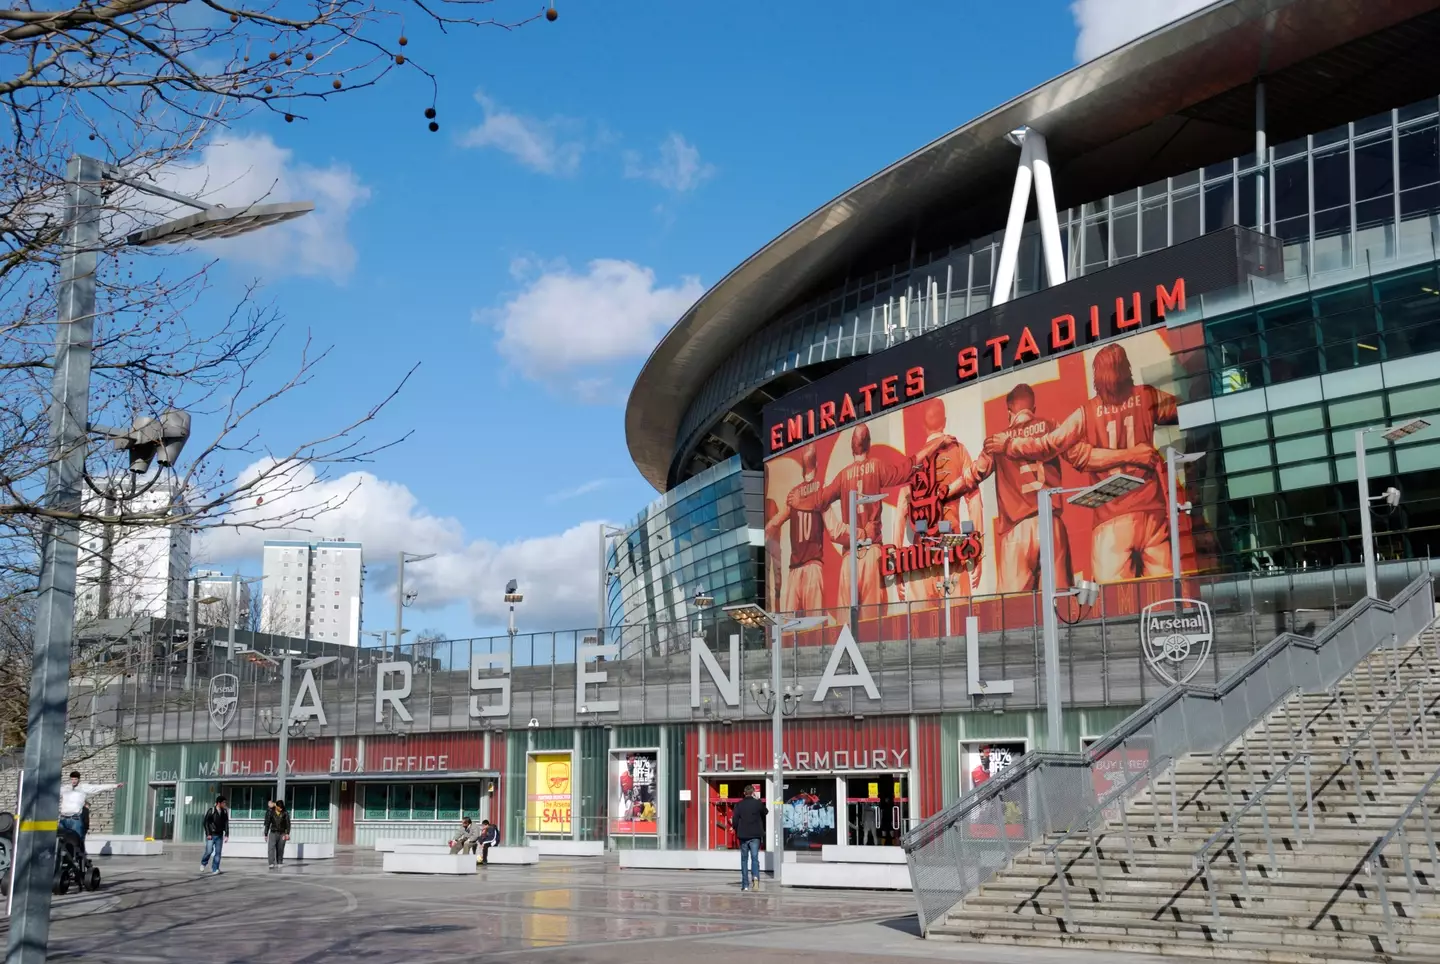 The Emirates looks set to miss out on hosting games. Image: Alamy